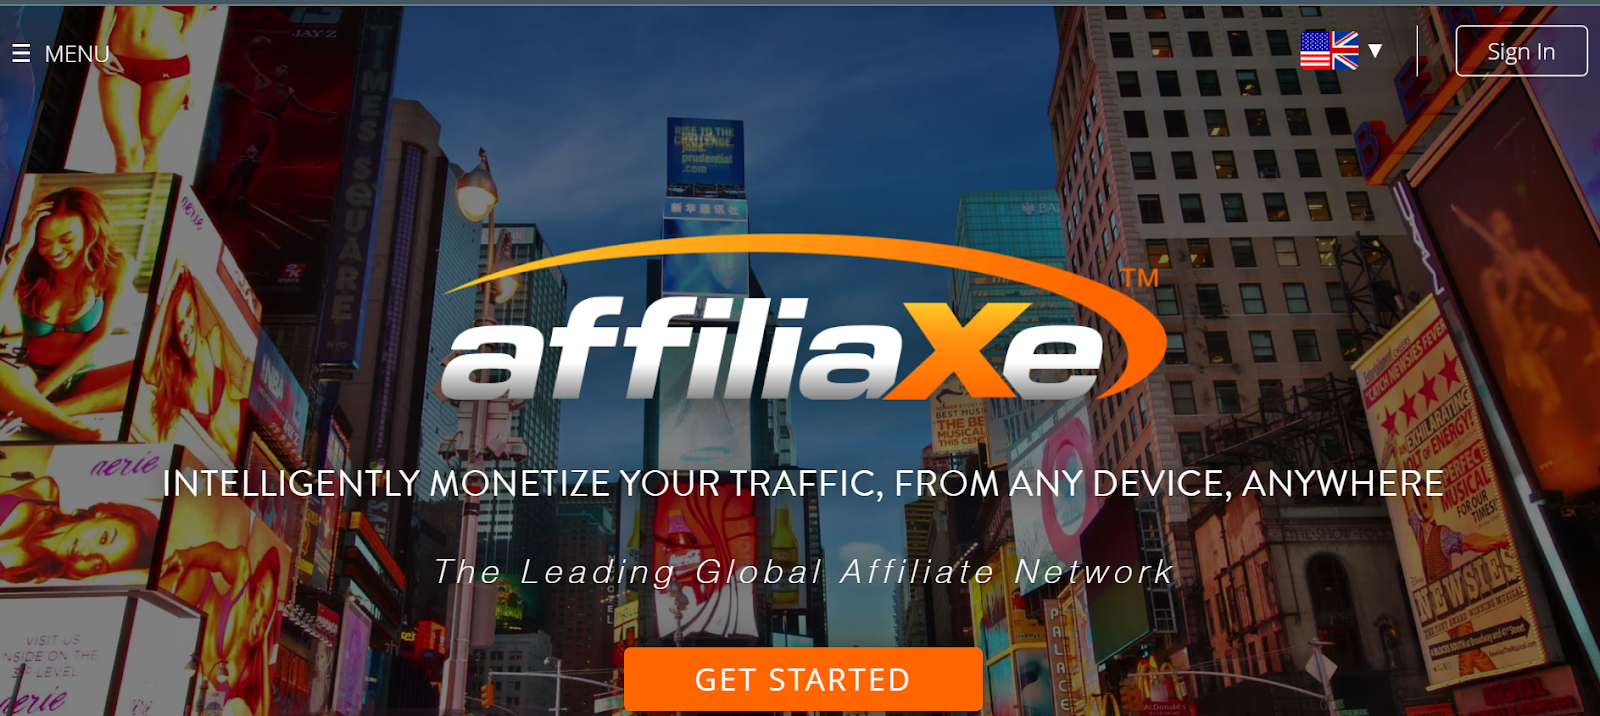 Affiliate marketing key stats for 2022: reasons you should consider affiliate marketing today in nigeria